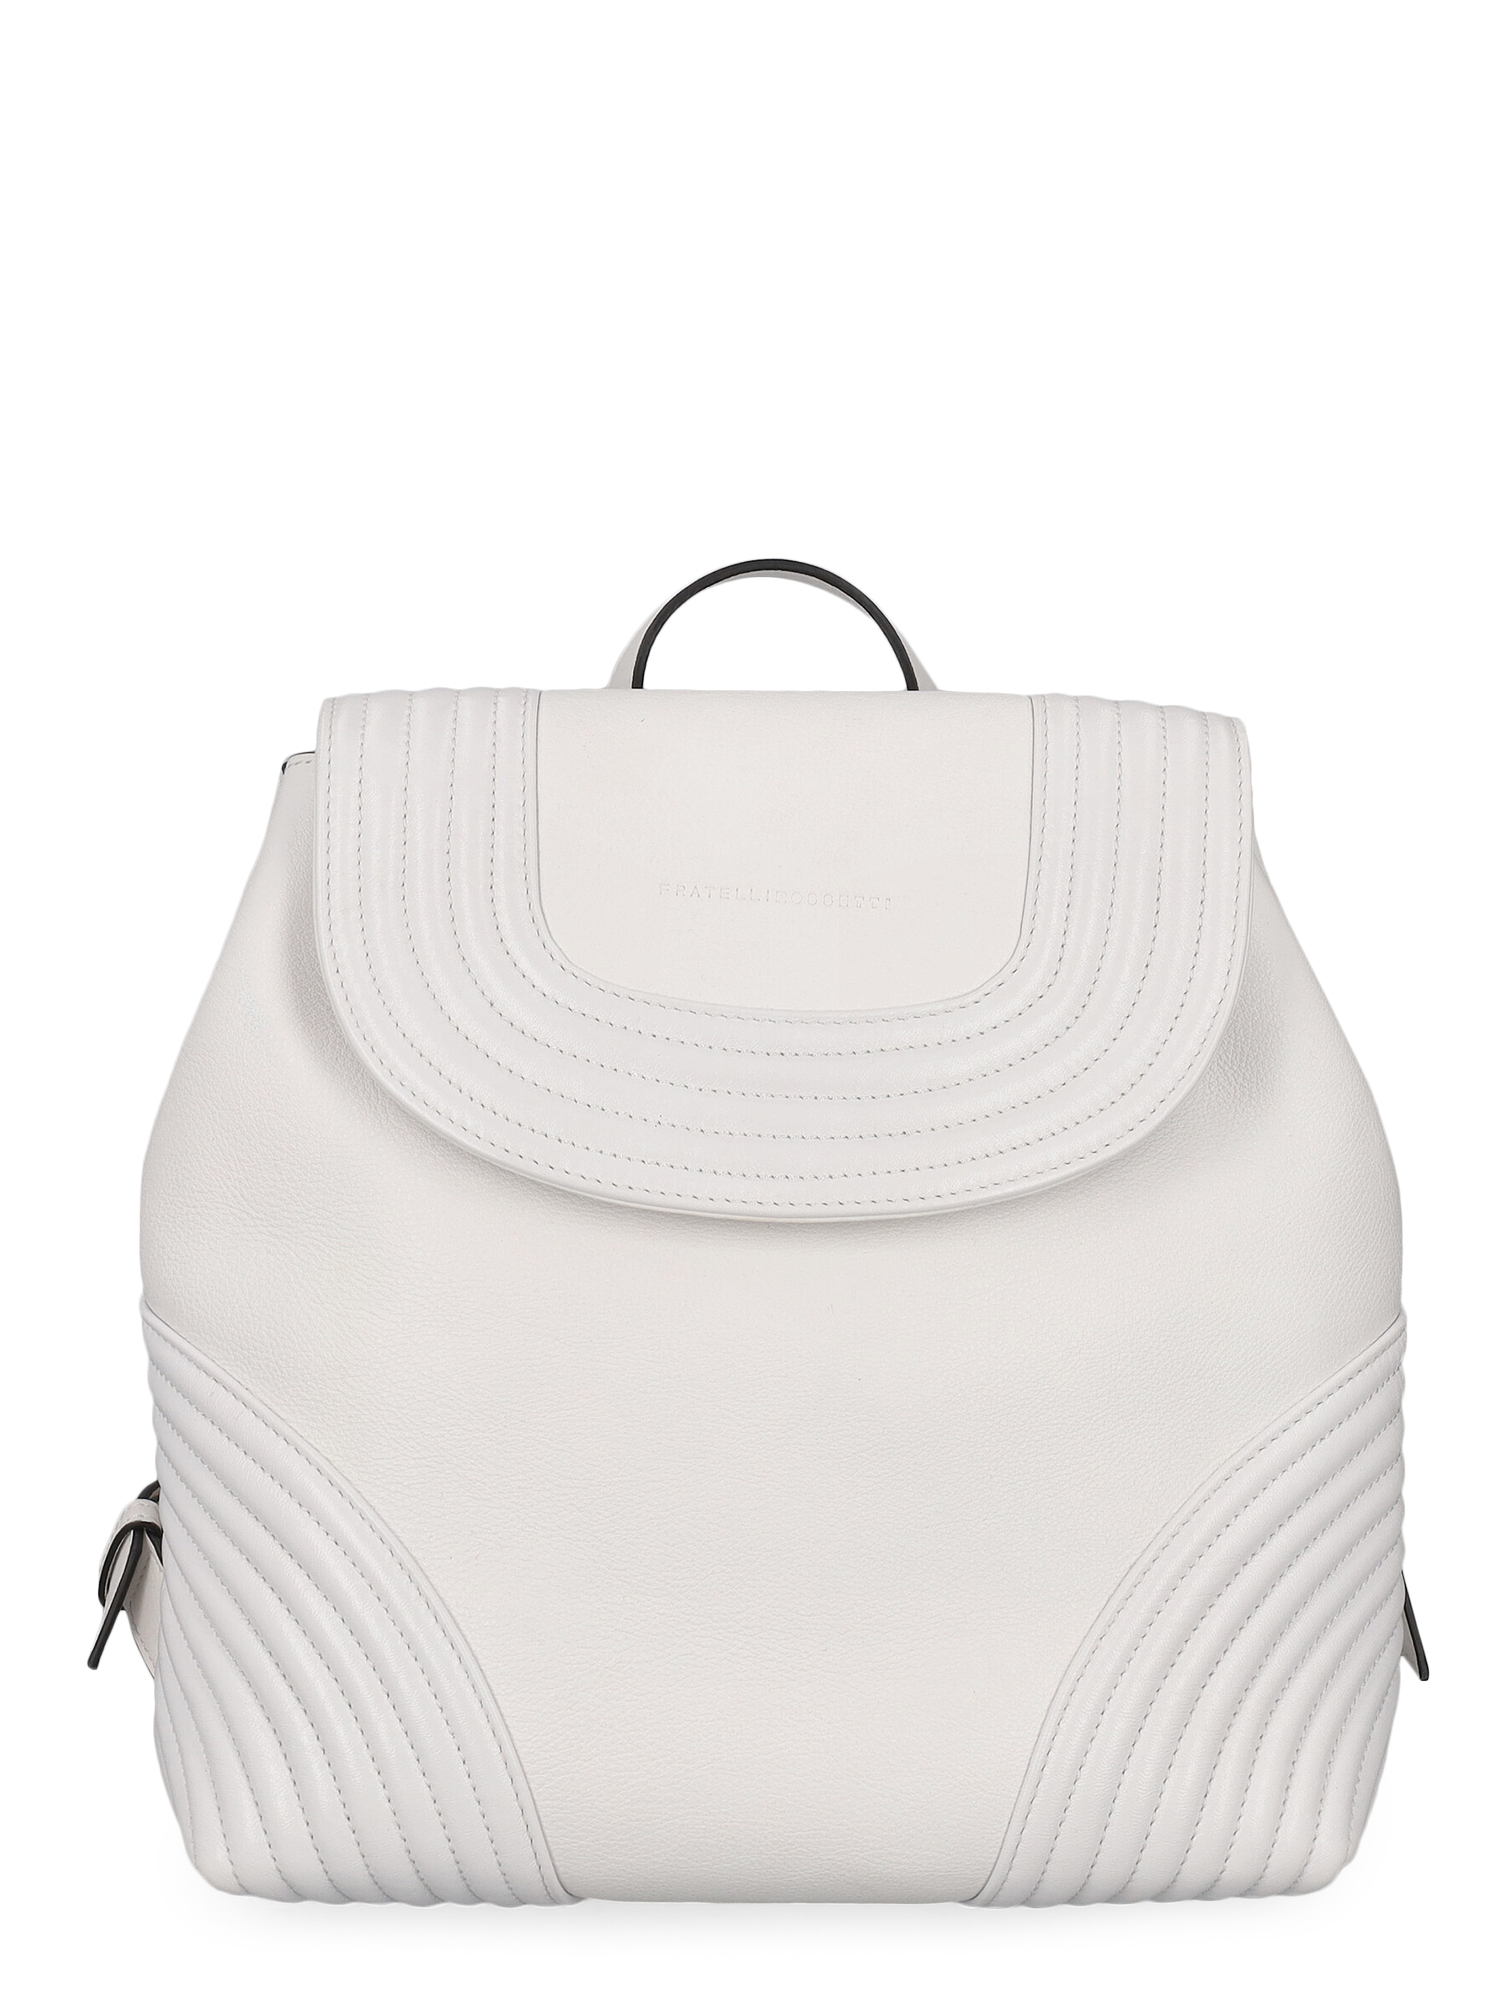 Pre-owned Fratelli Rossetti Women's Backpacks -  - In White Leather